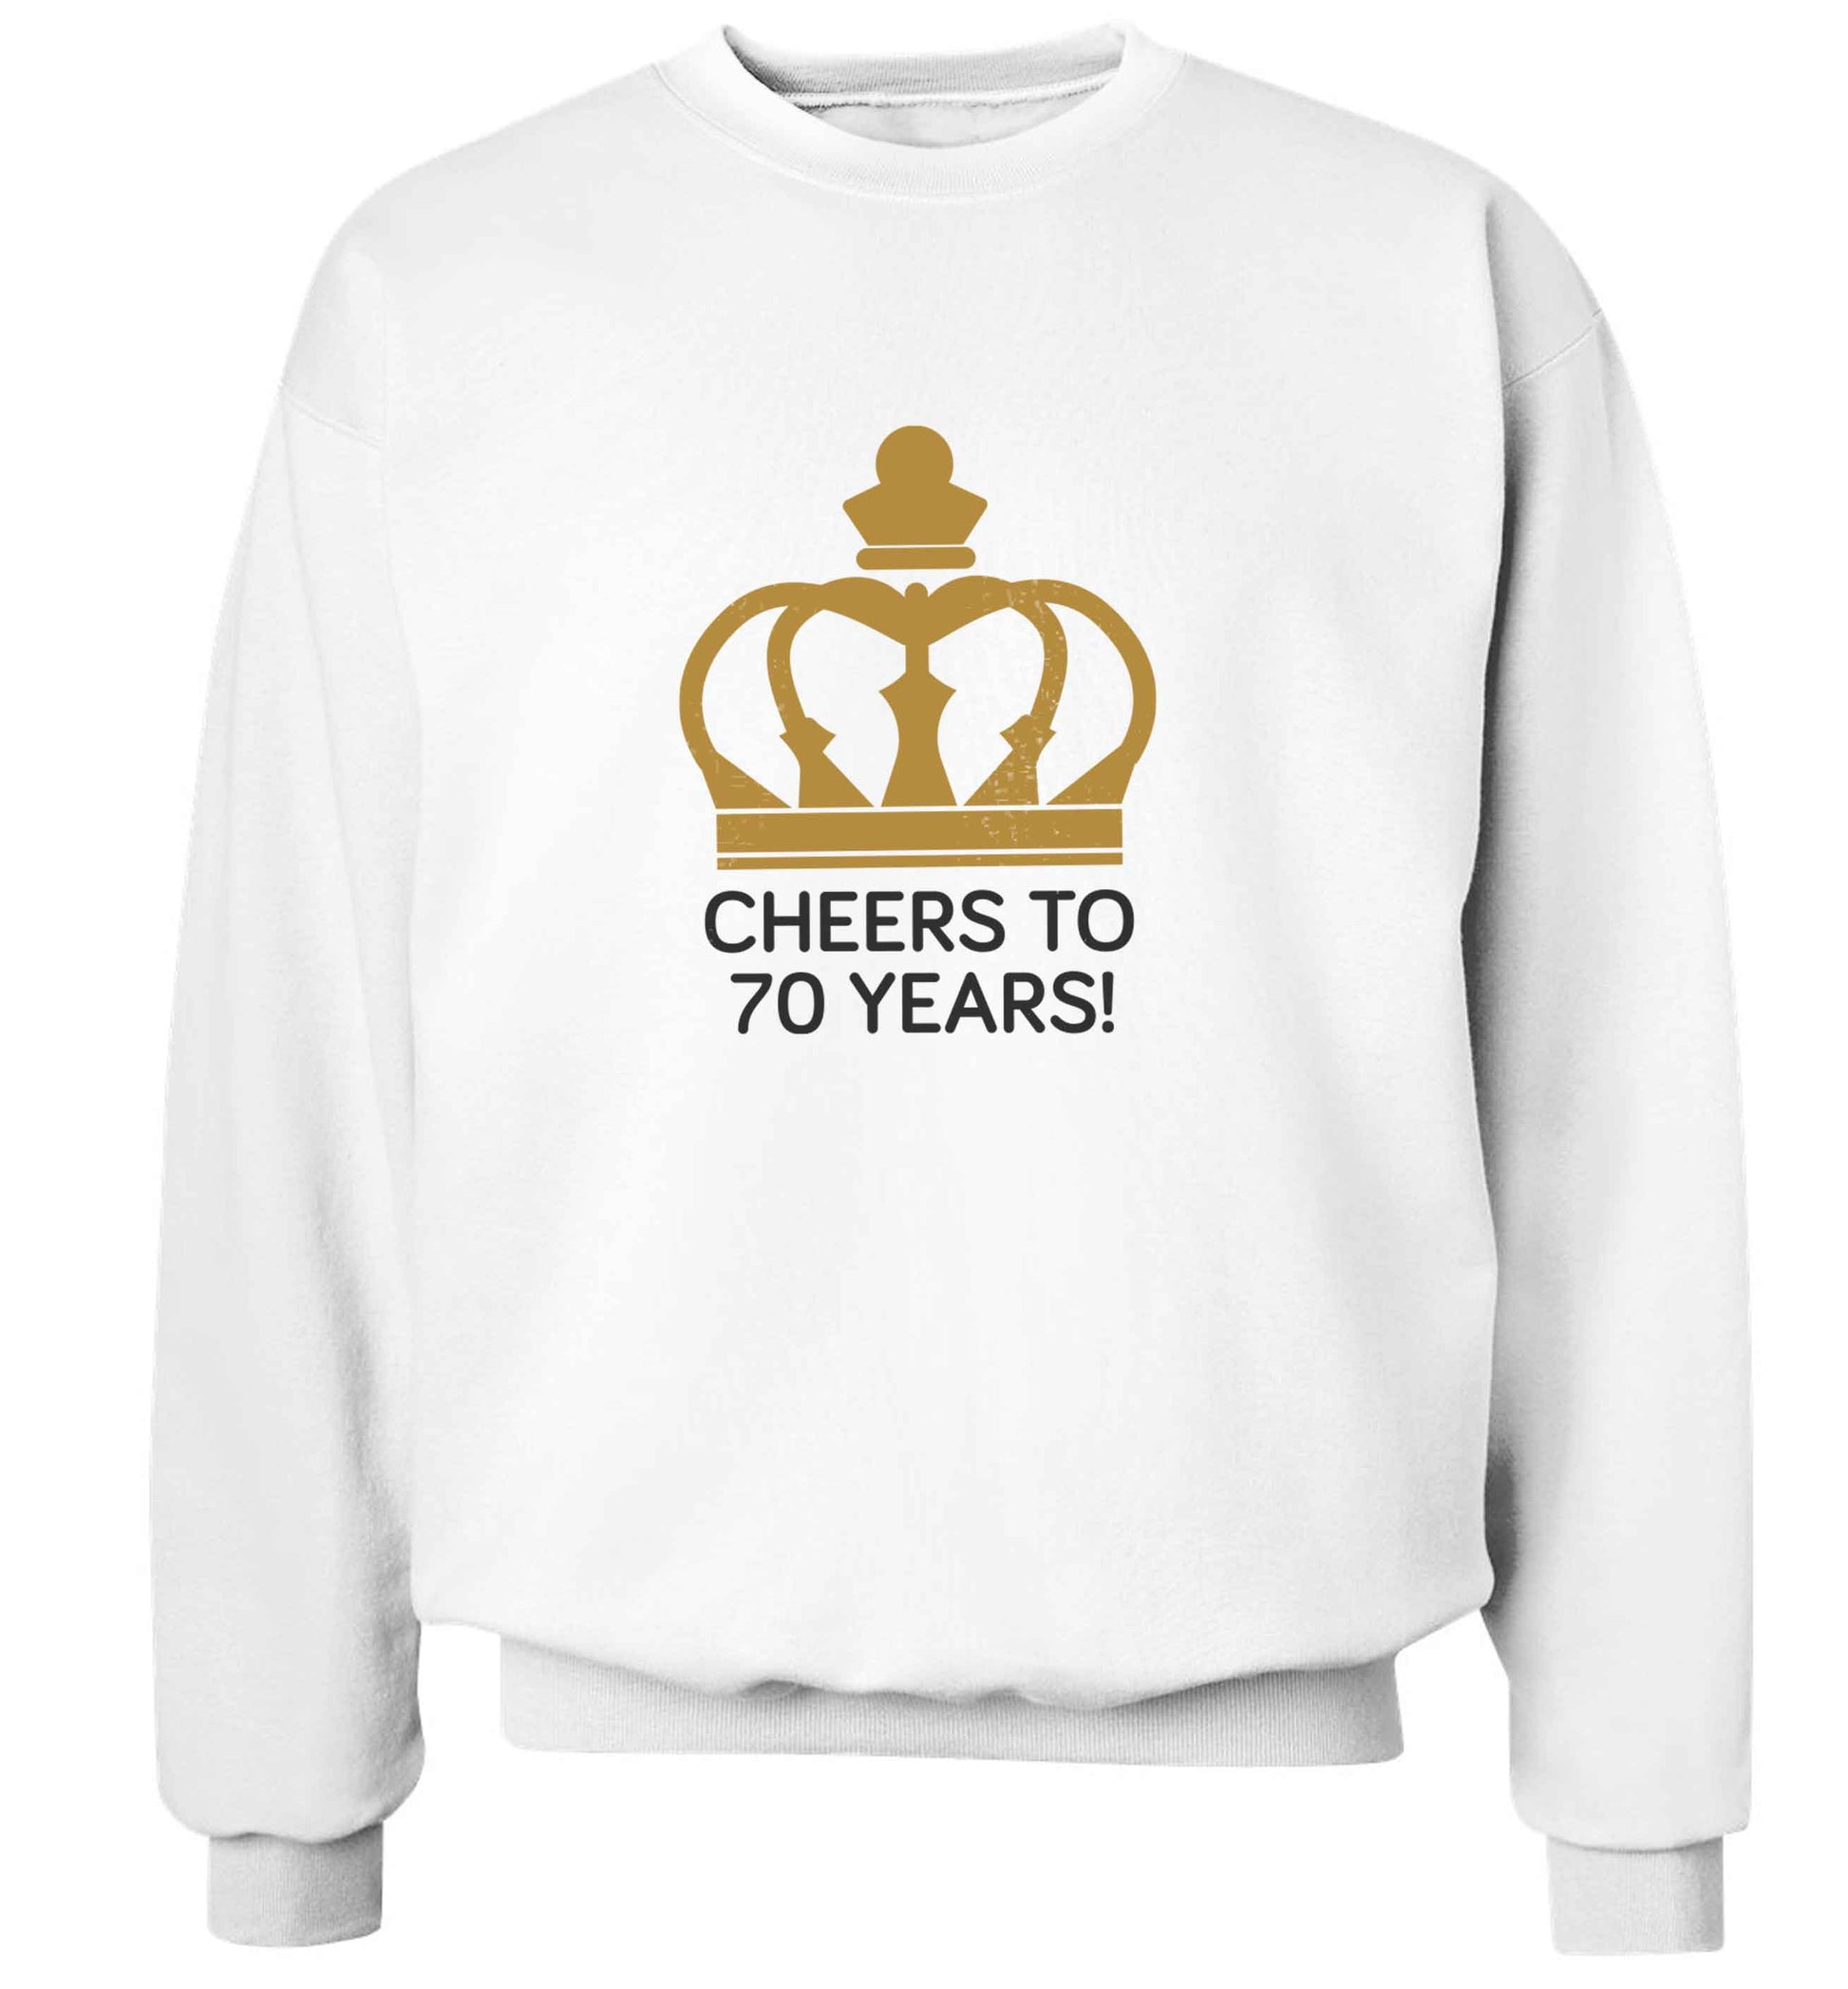 Cheers to 70 years! adult's unisex white sweater 2XL